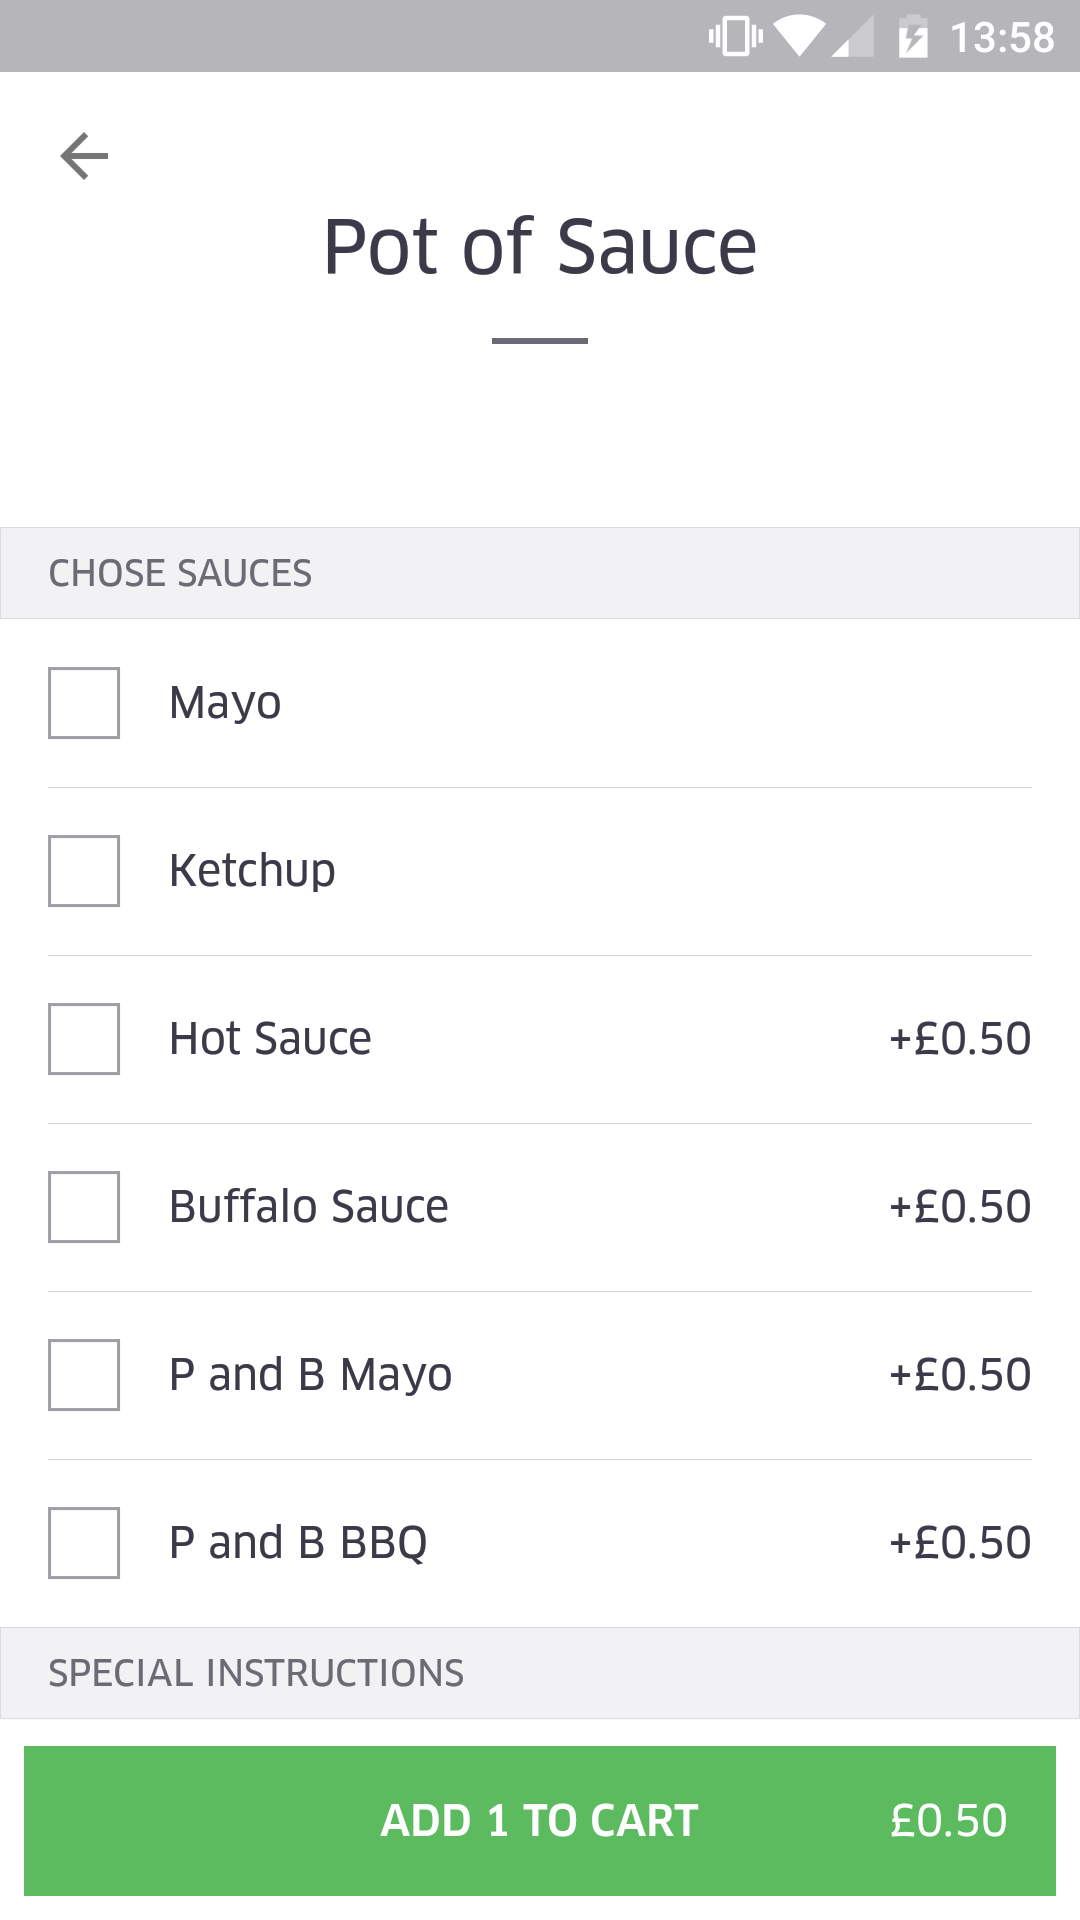 Screenshot of UberEats menu displaying all sauces at the same price, even though they charge extra for some sauces